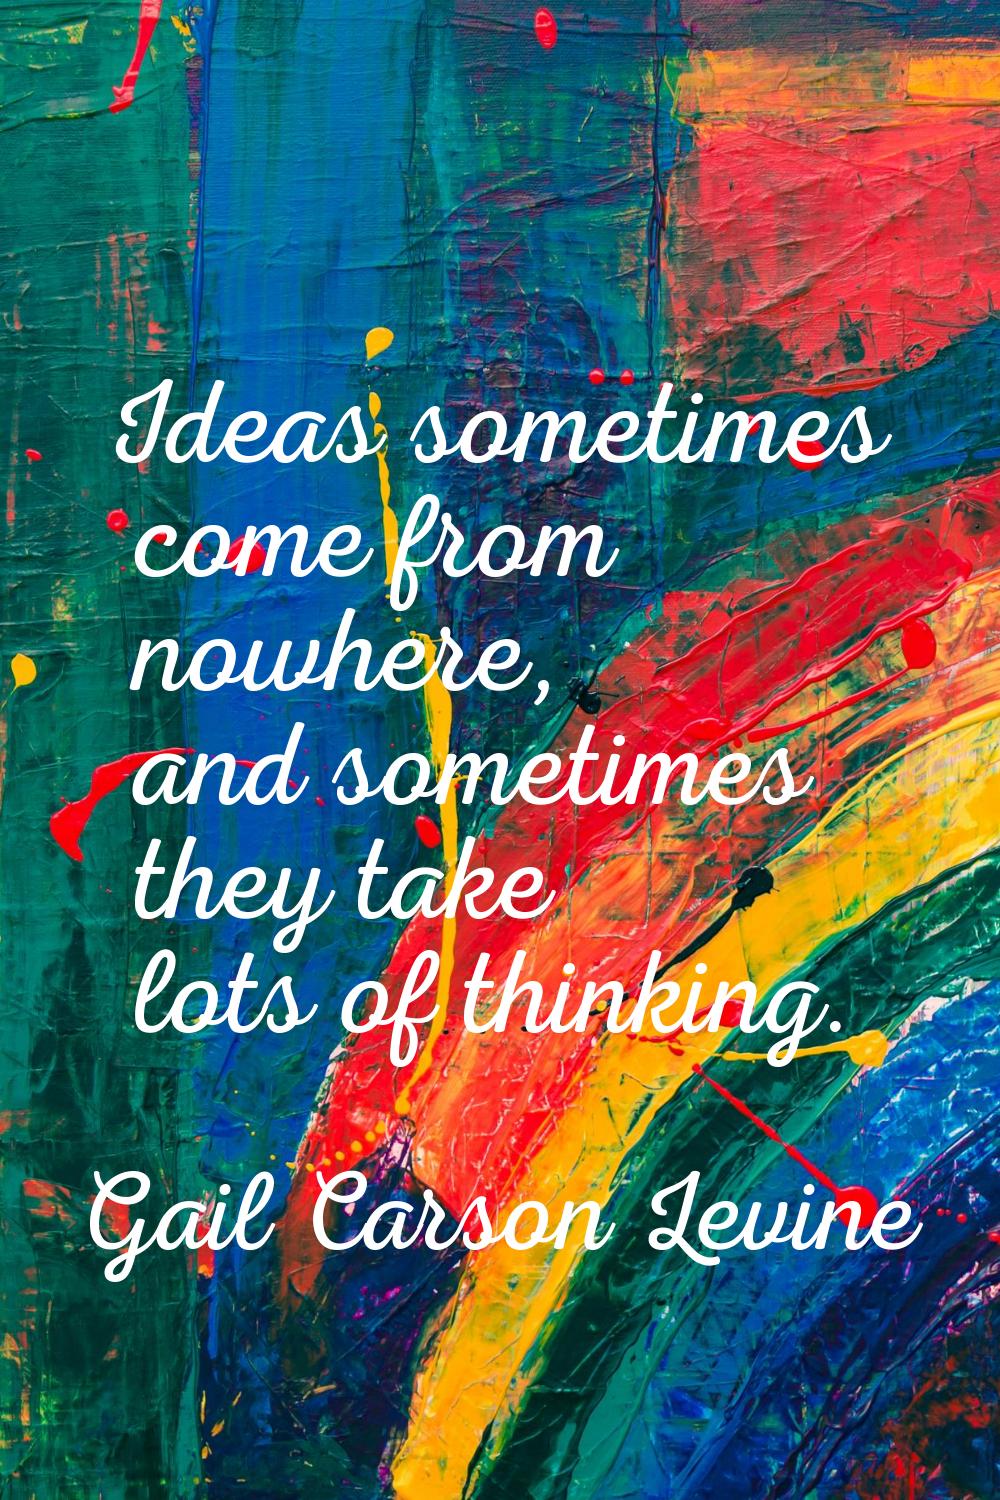 Ideas sometimes come from nowhere, and sometimes they take lots of thinking.